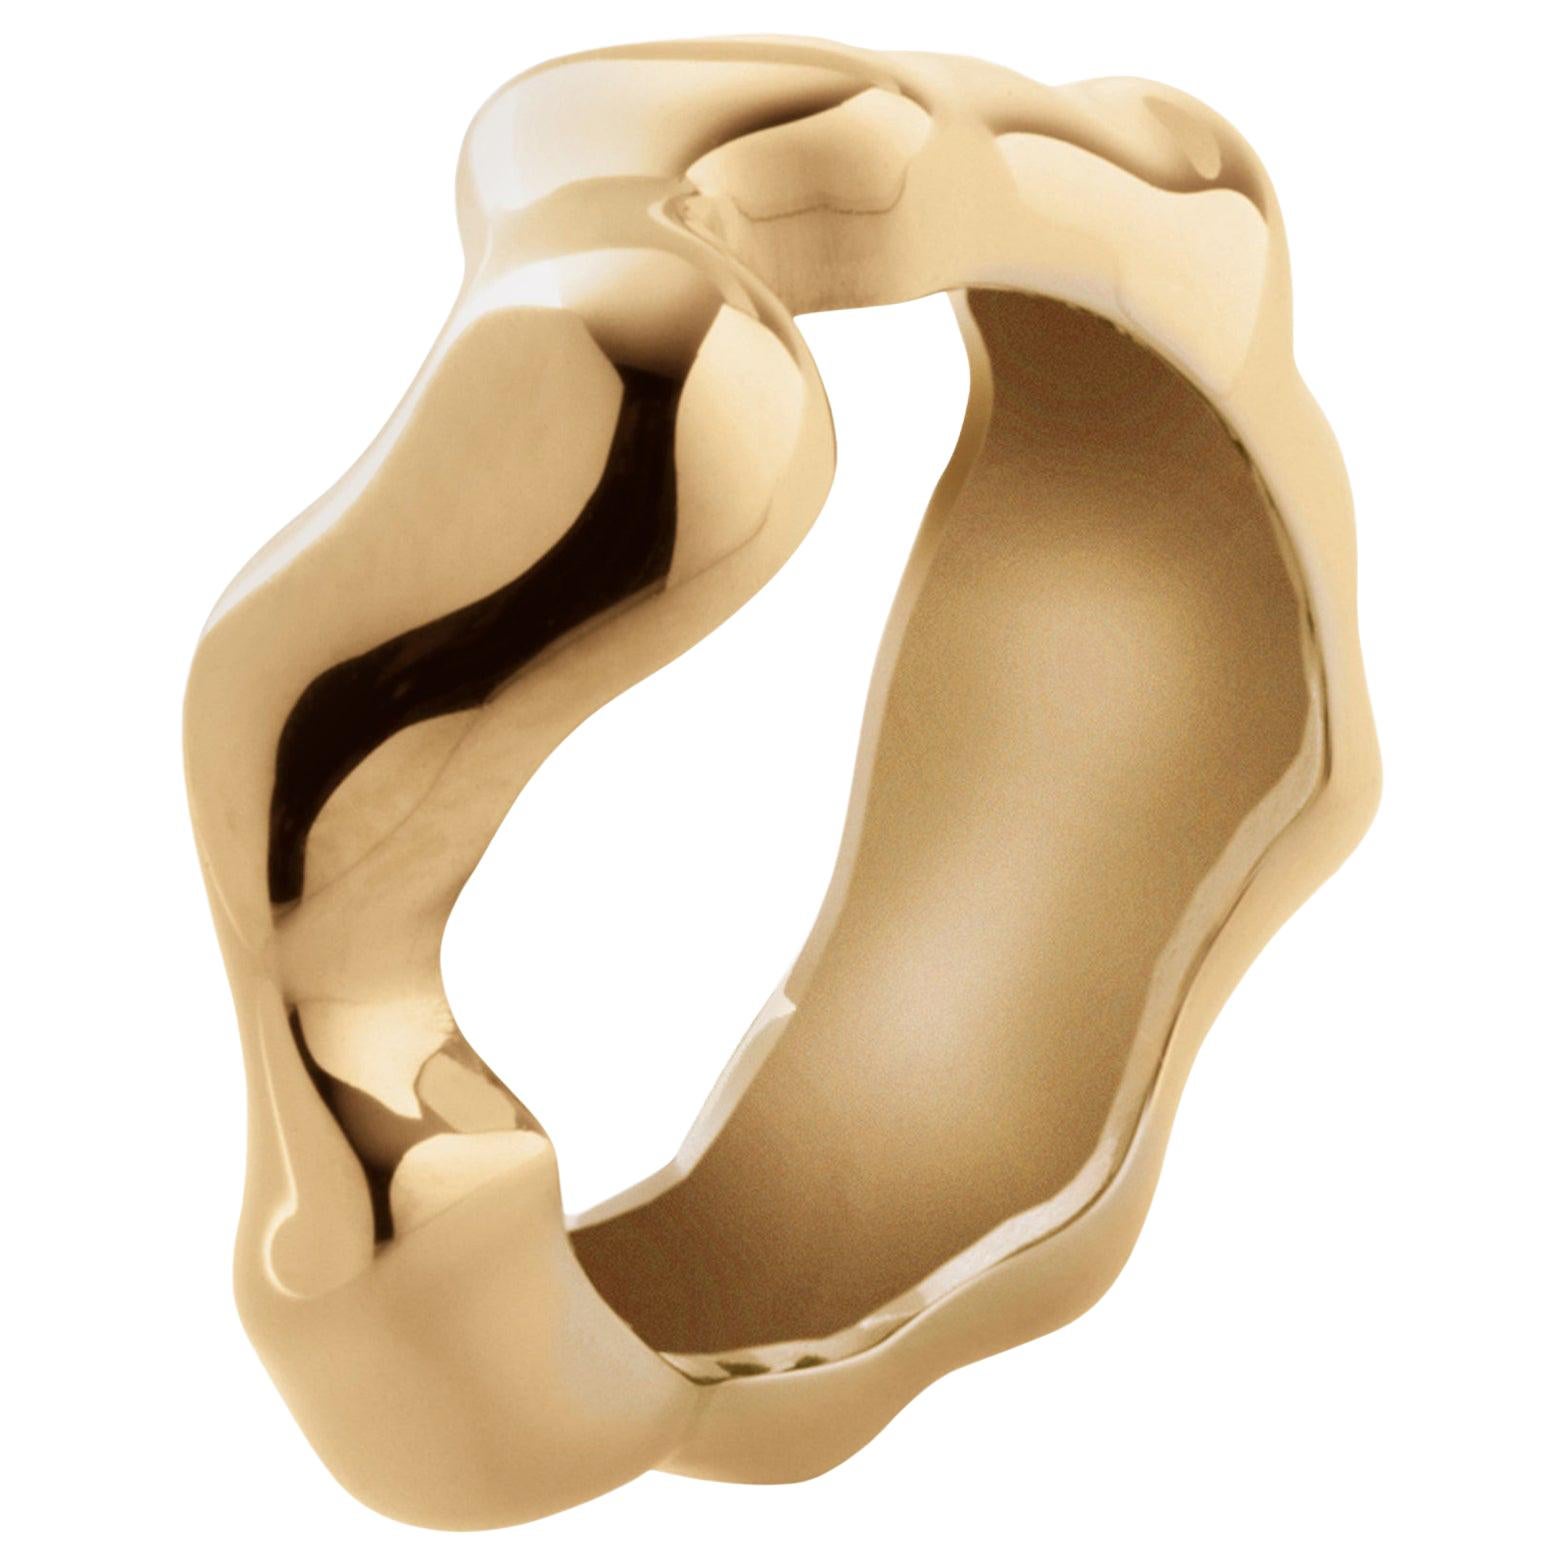 Nathalie Jean Contemporary Gold Limited Edition Fashion Band Sculpture Ring